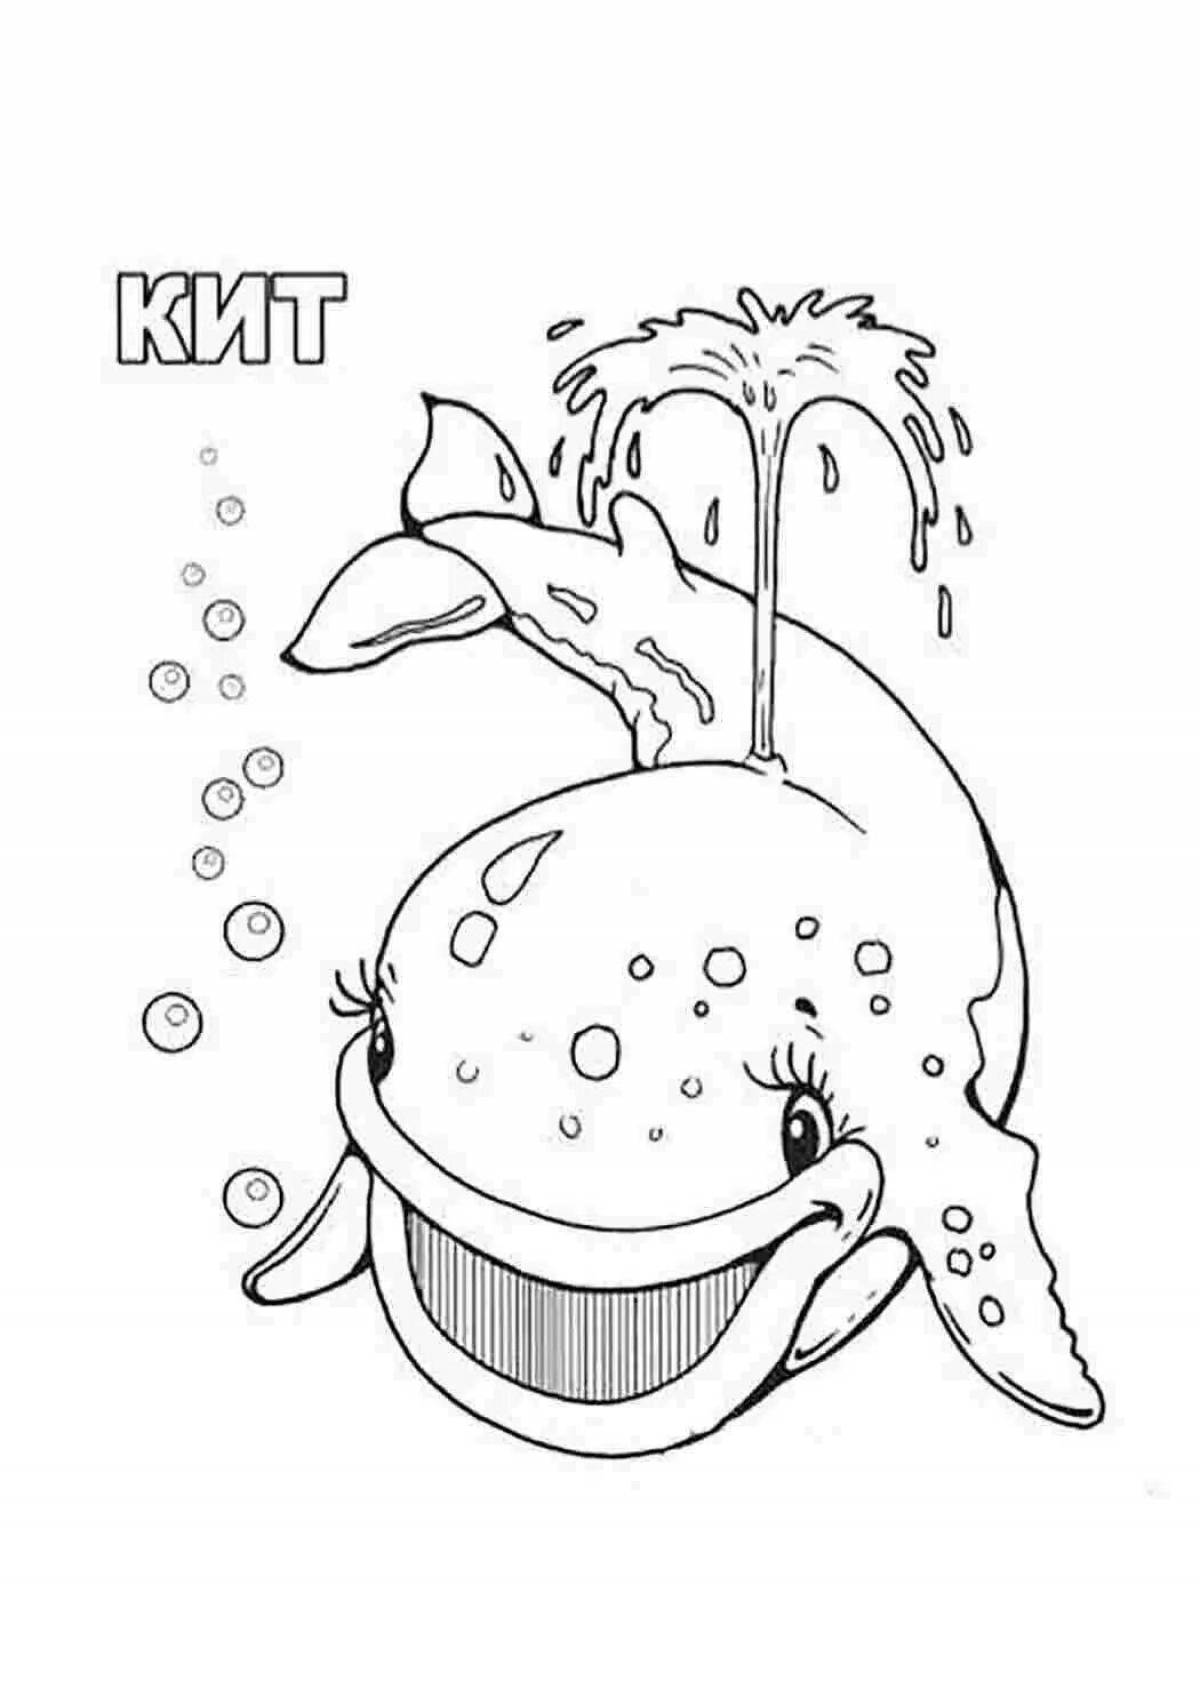 A fascinating coloring picture of a whale